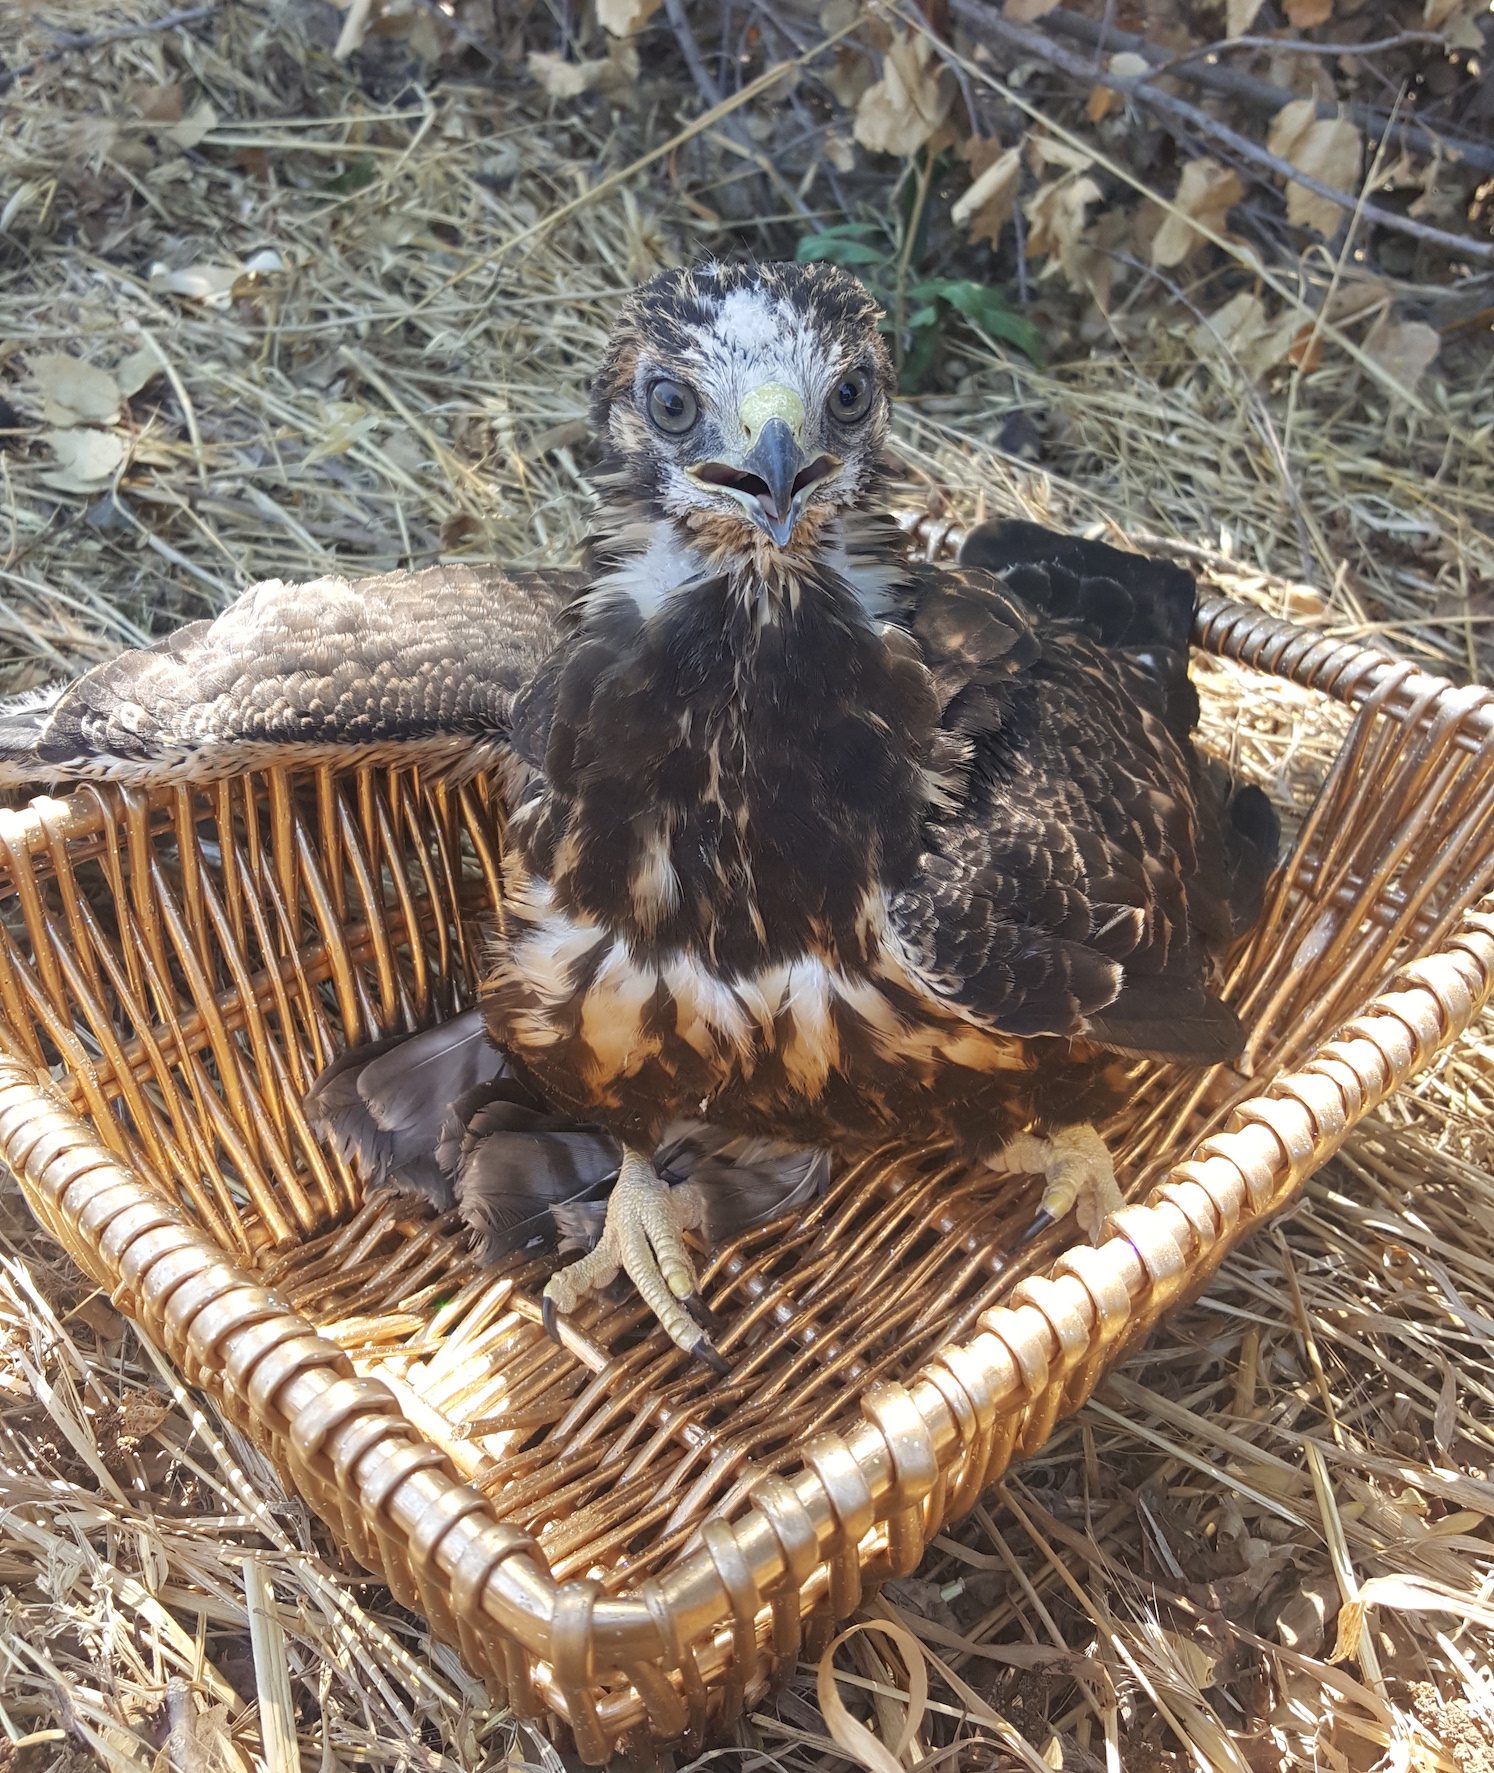 The safely rescued juvenile Swainson's Hawk